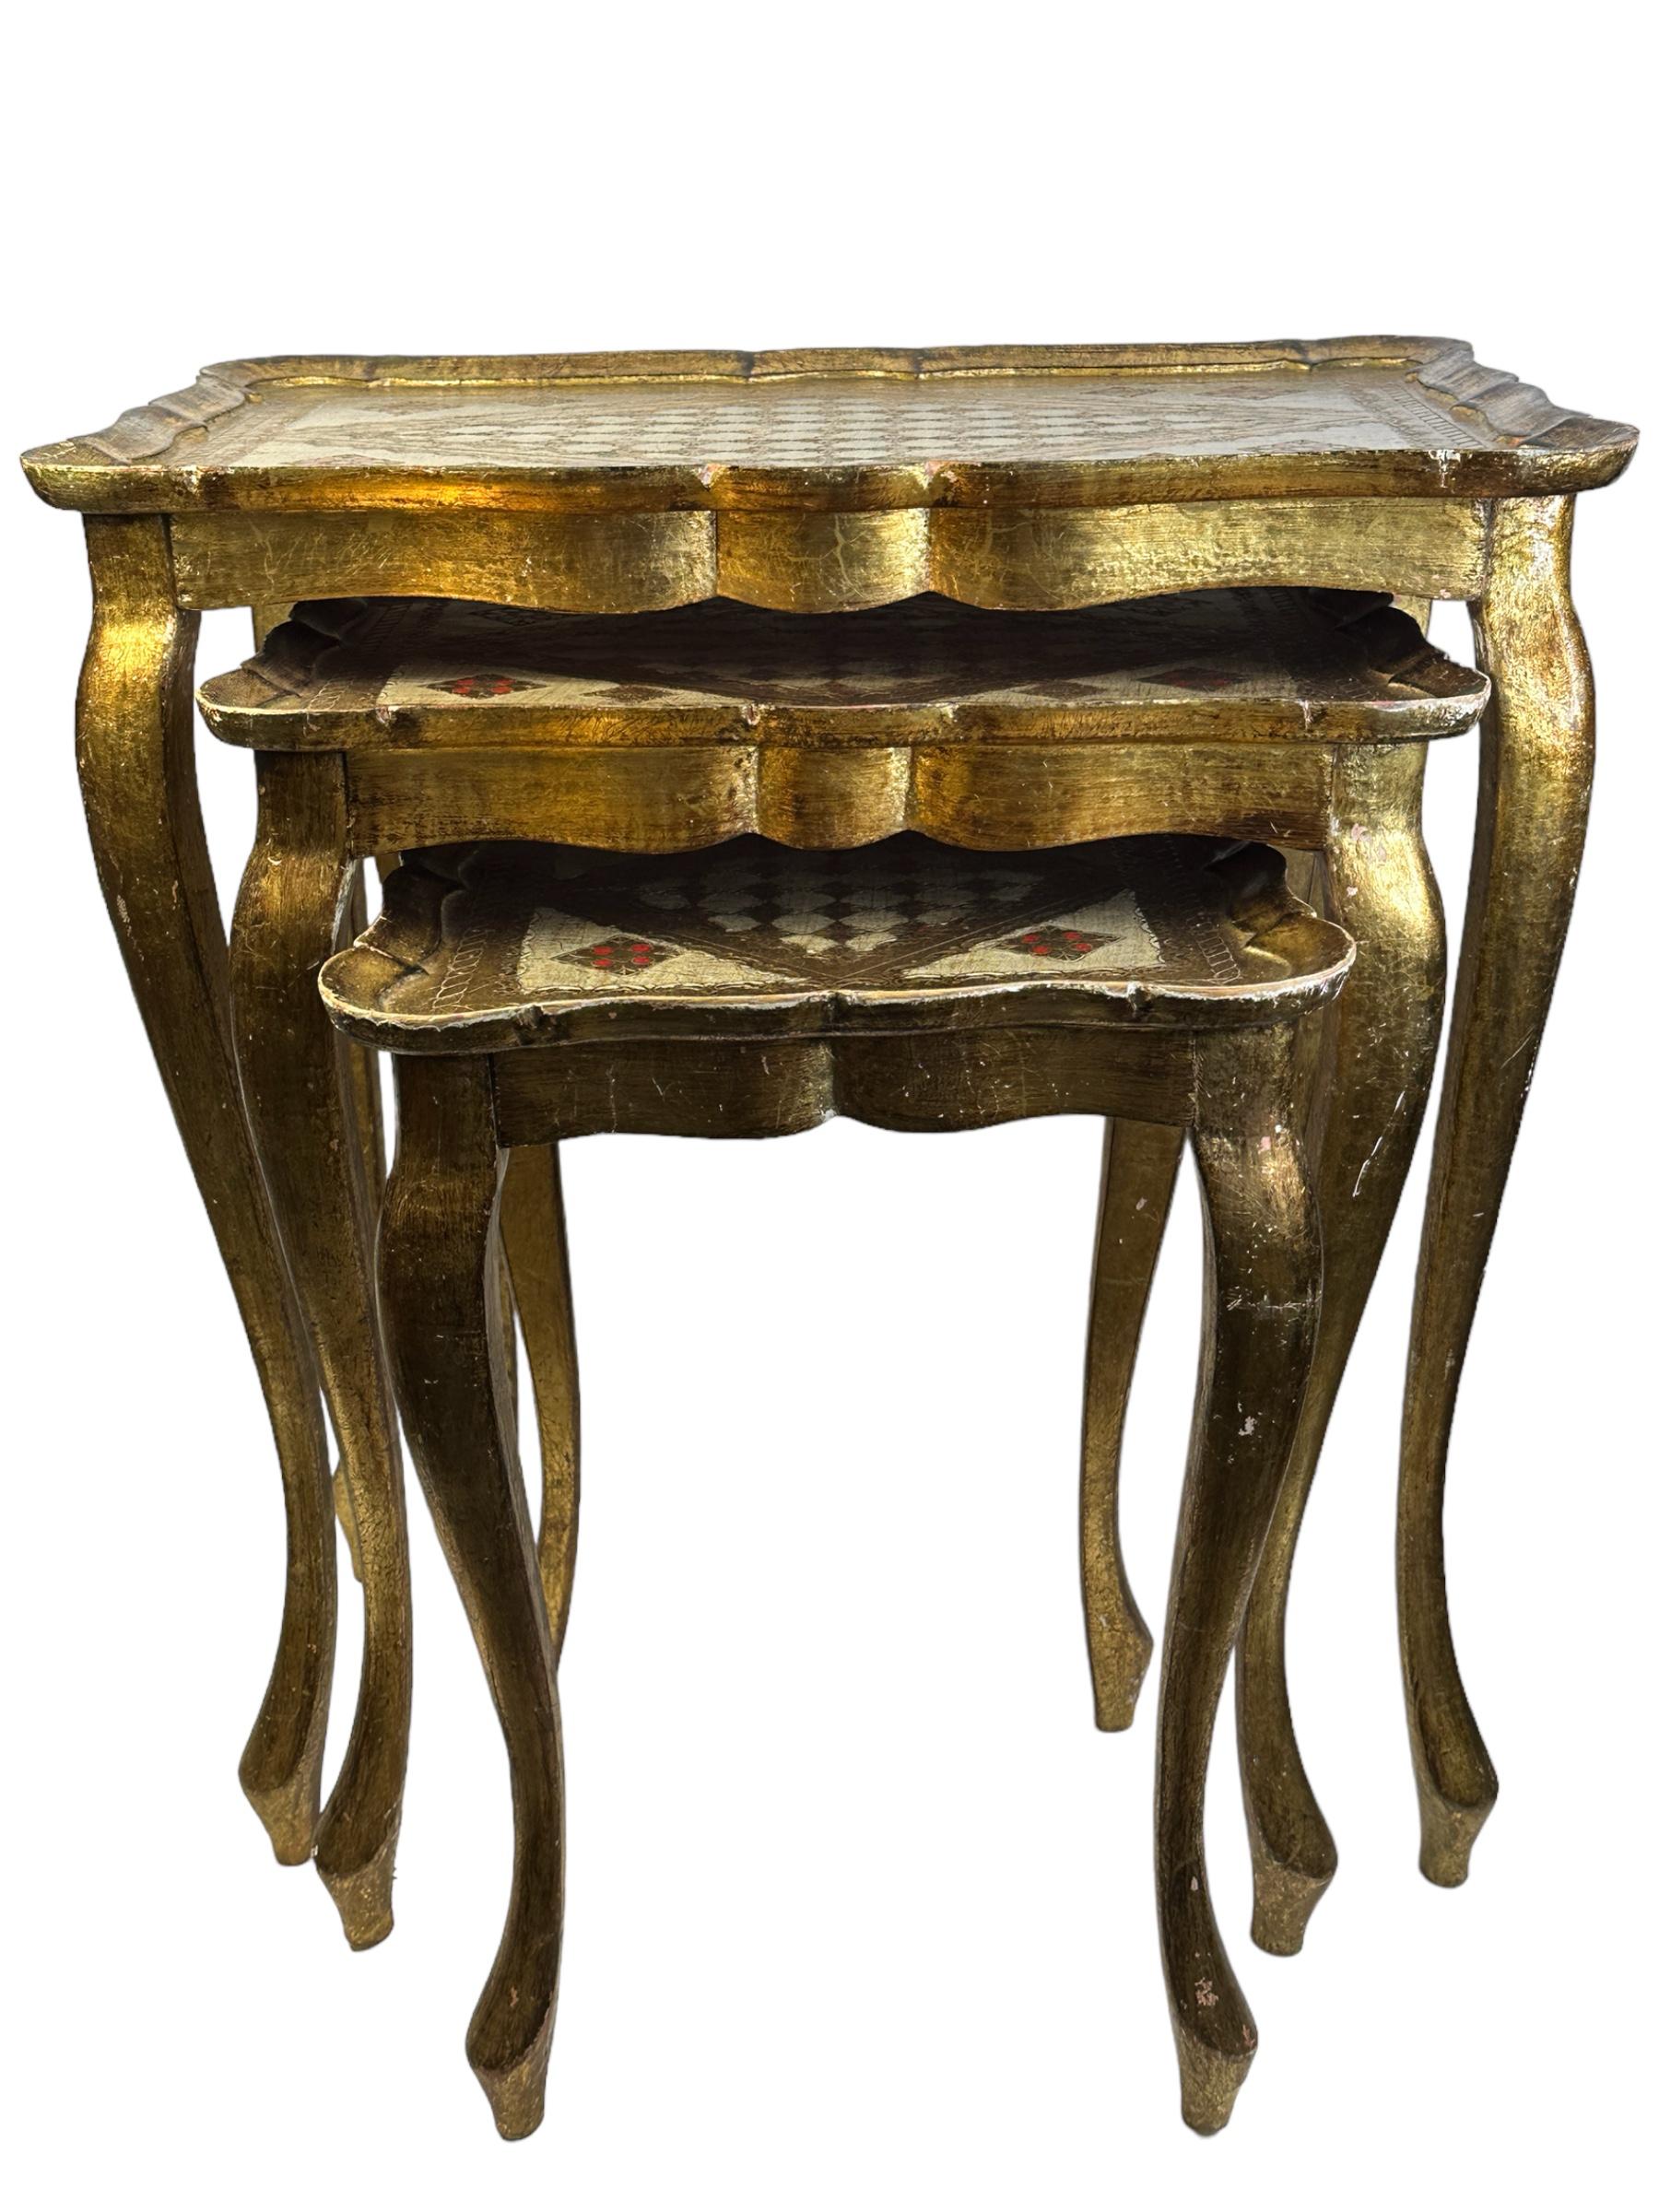 This set of three Florentine-style nesting tables was made in Italy, circa 1960. They feature cabriole legs and intricate hand painted details on the tabletops with scalloped edges. The gilded wood has a beautifully weathered patina. These pieces